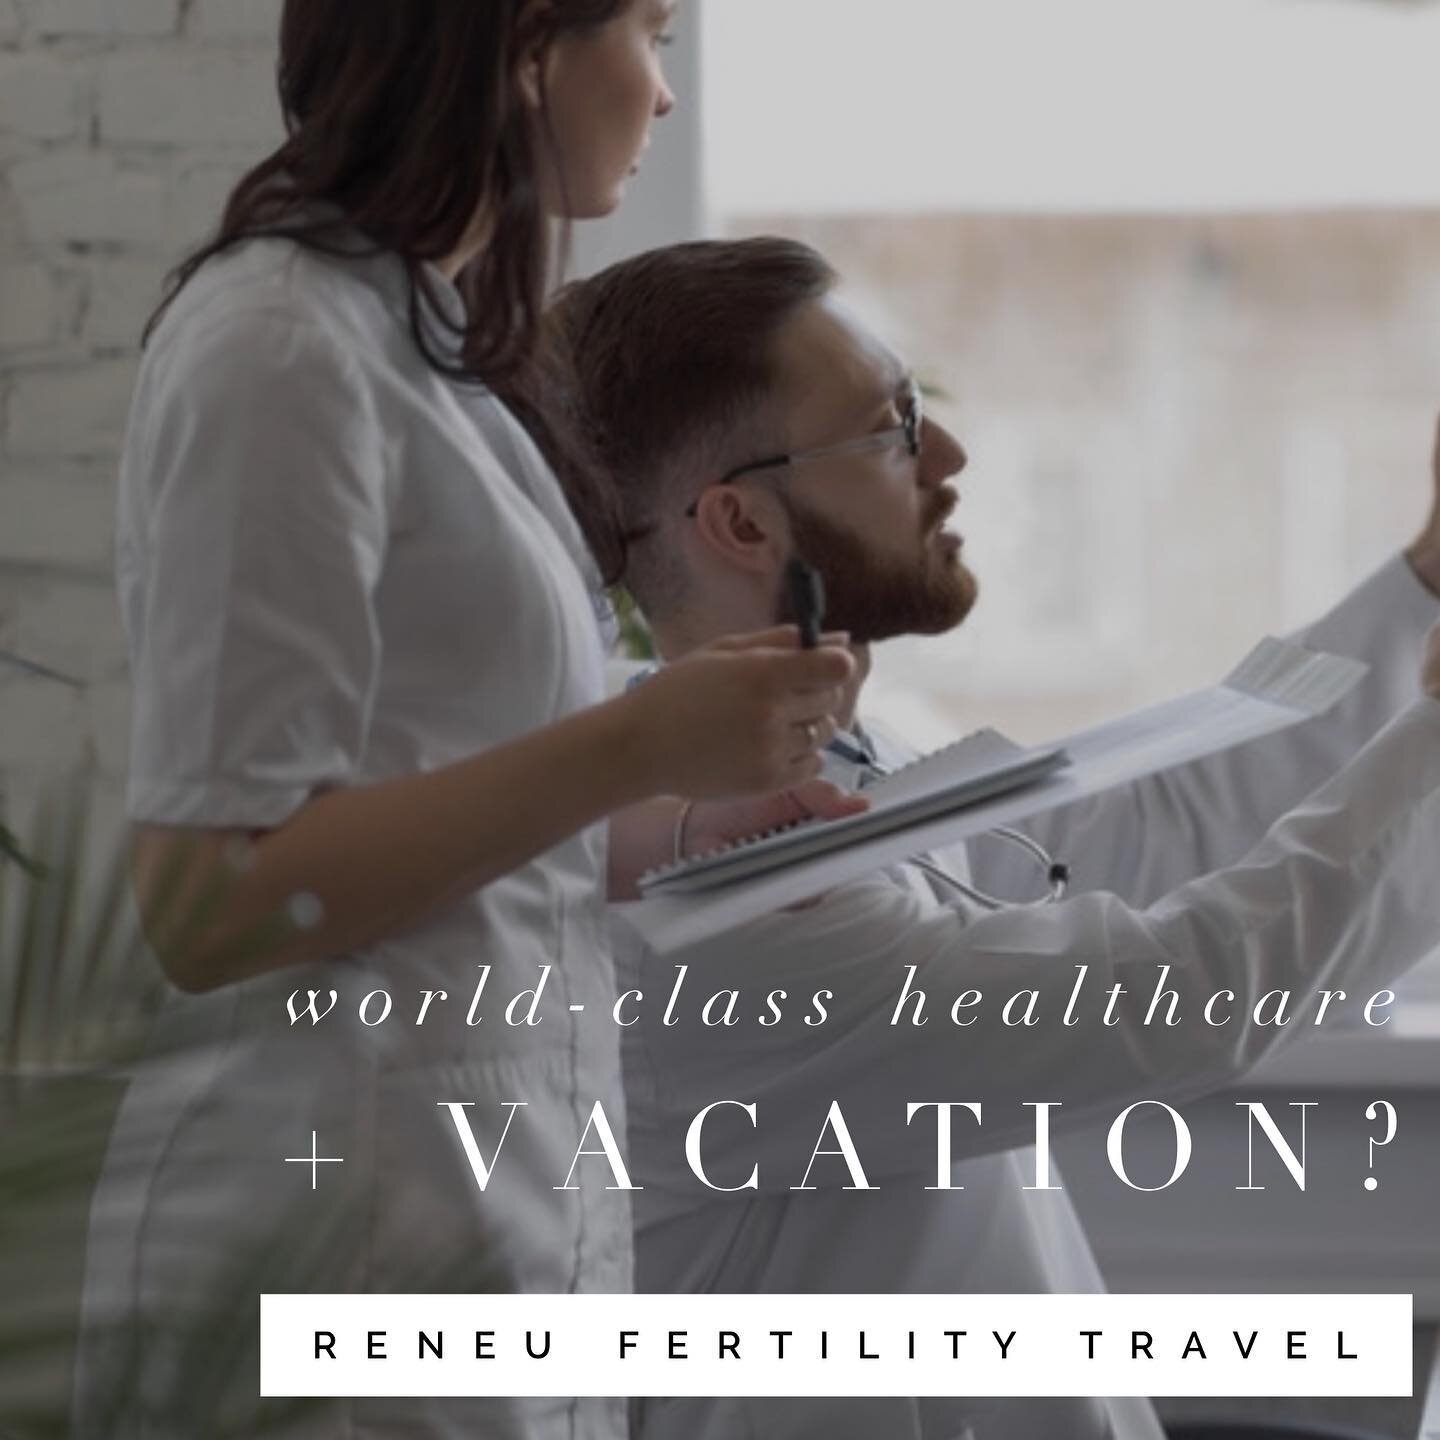 Work with world-renowned doctors in the fertility field who have a number of firsts to their name.

#fertilitytravel #capetown #fertilityjourney #fertility #capetownetc #capetownsouthafrica